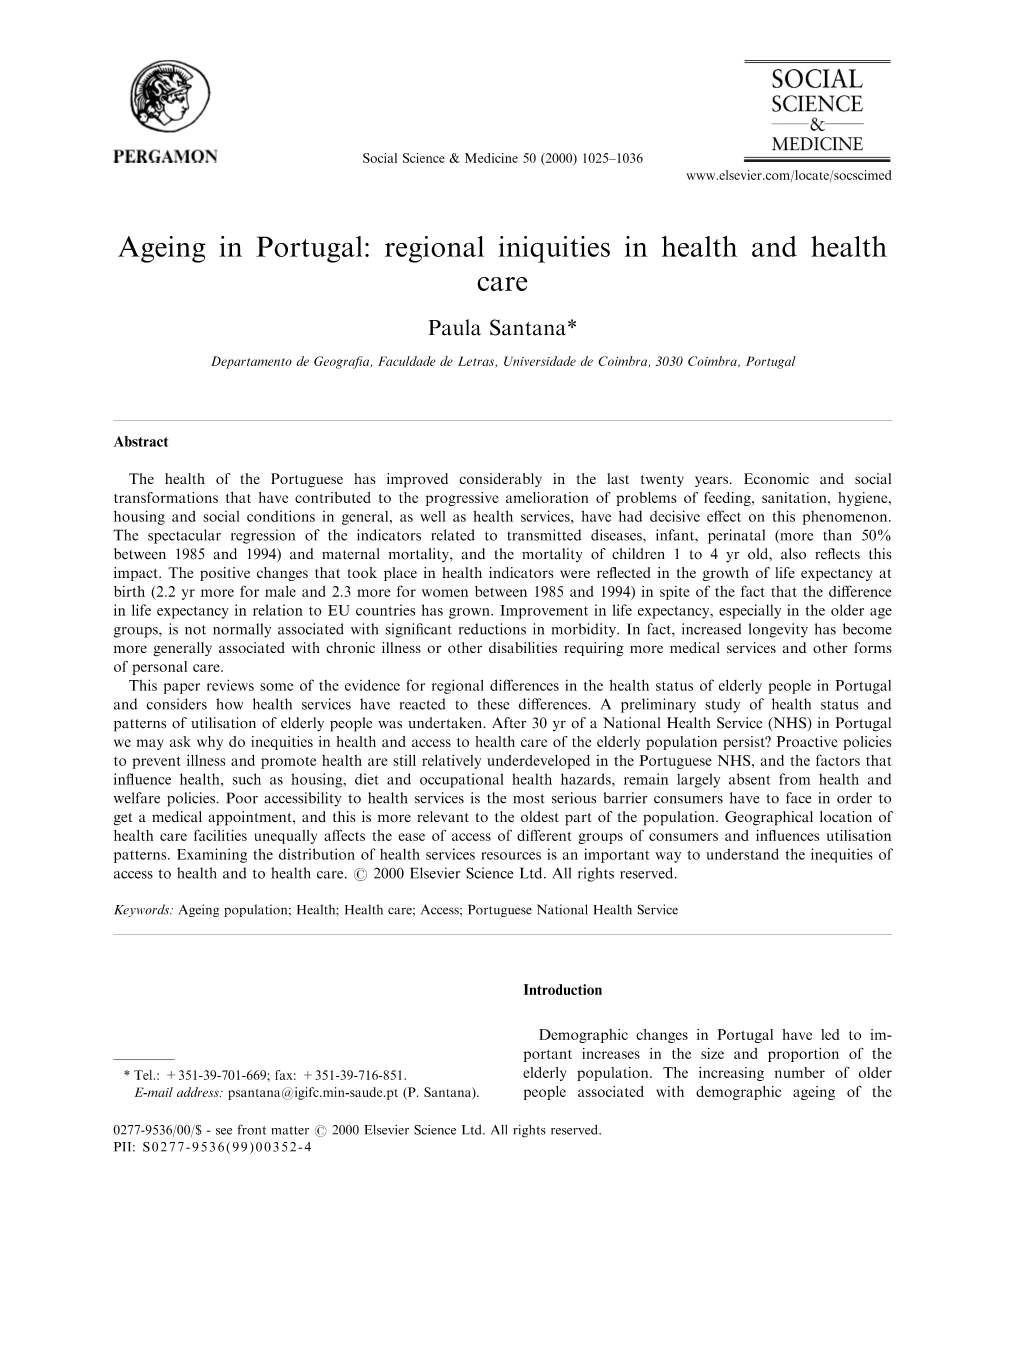 Ageing in Portugal: Regional Iniquities in Health and Health Care